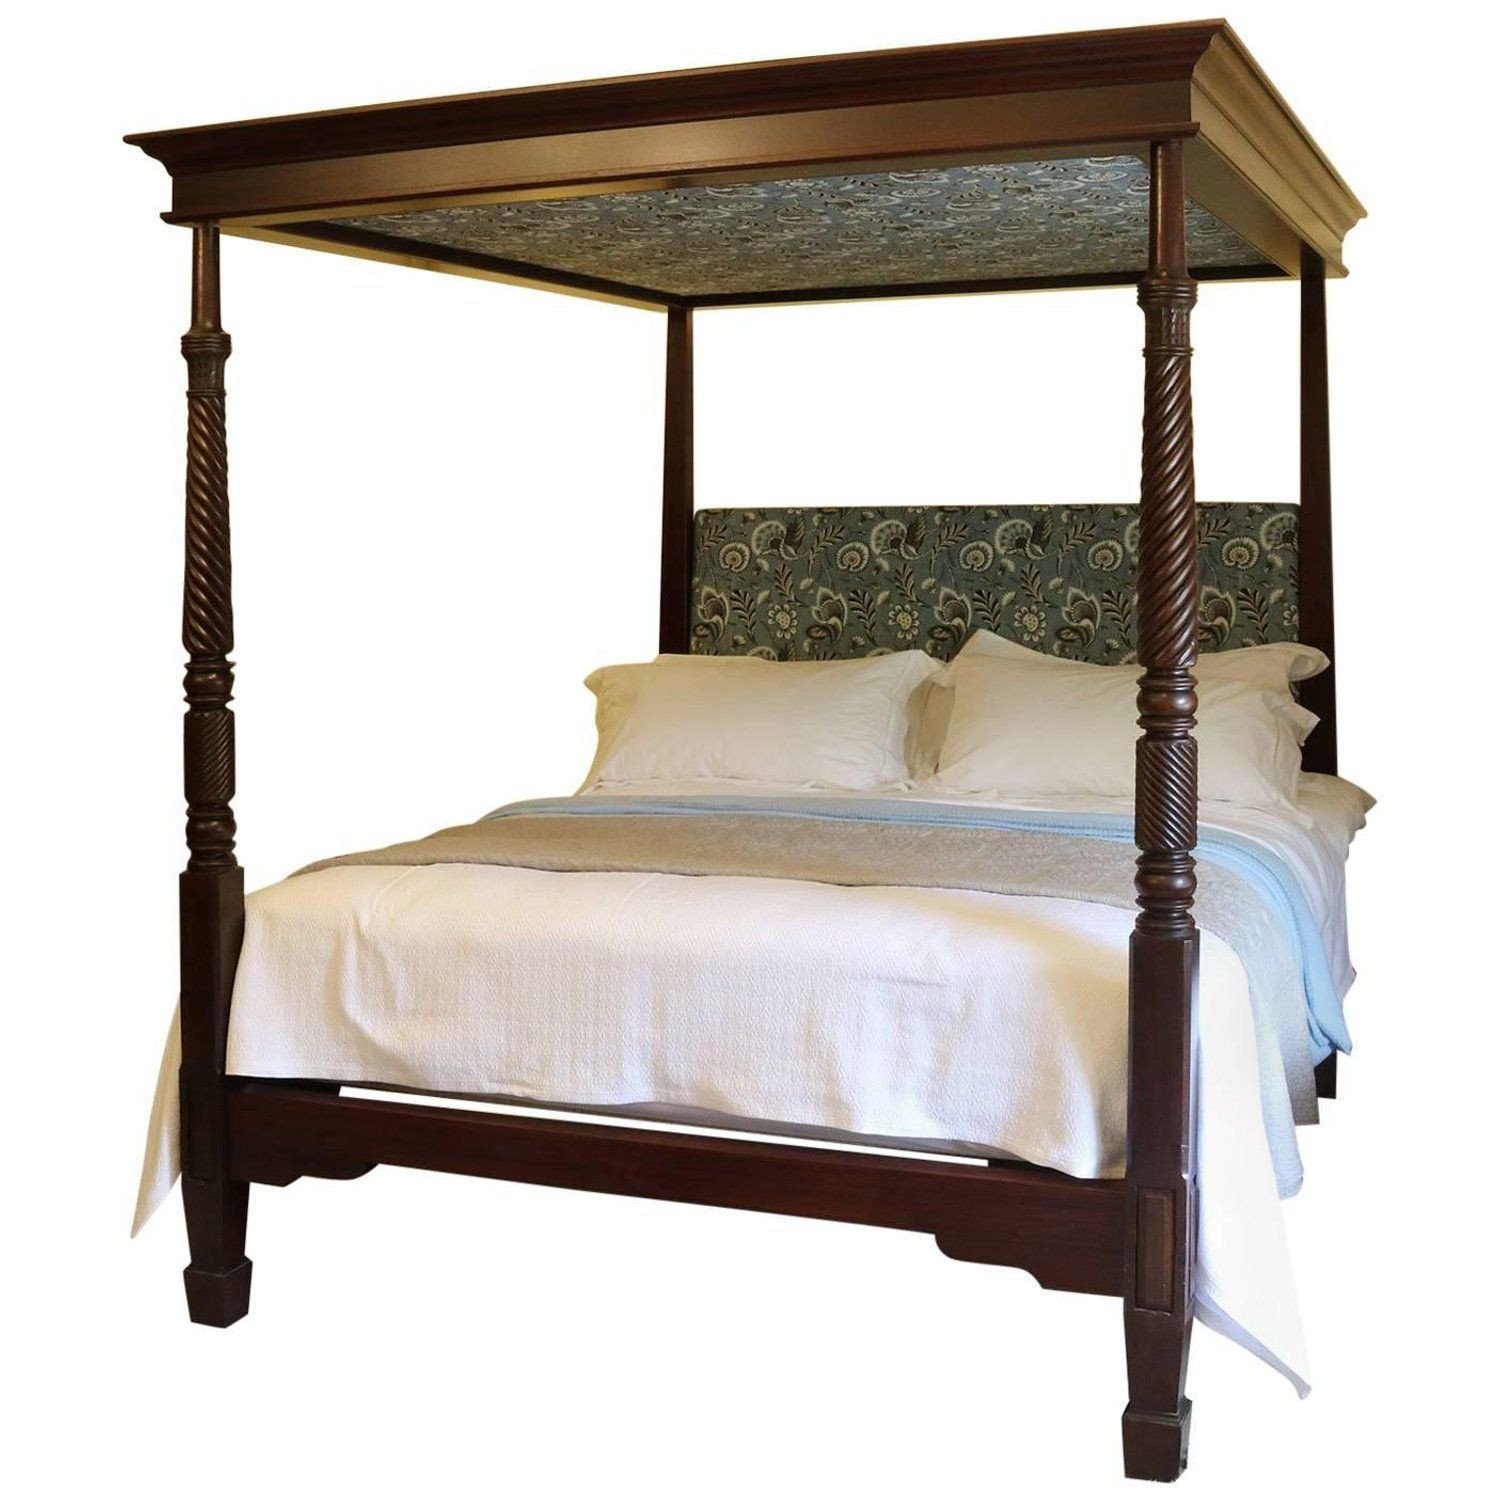 Queen Size Canopy Bedroom Set Inspirational 1stdibs Reconstructed Wooden Four Poster Bed W4p101